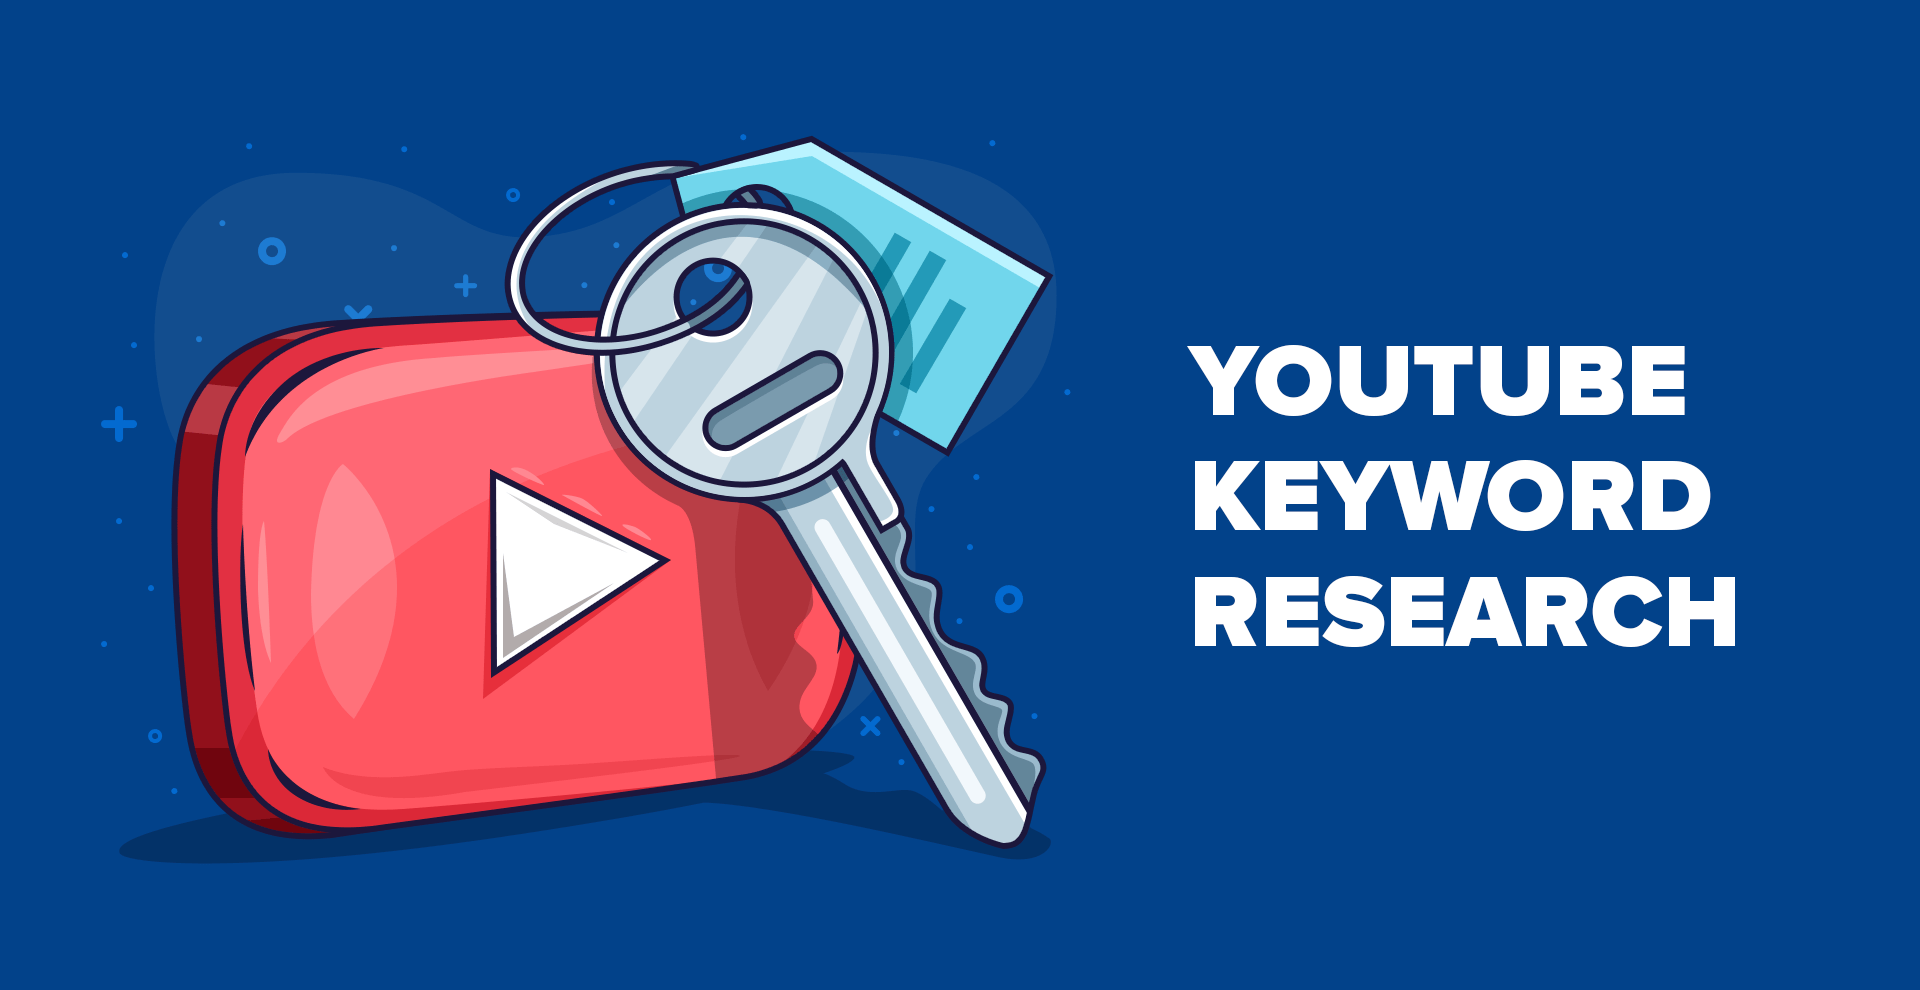 research on youtube